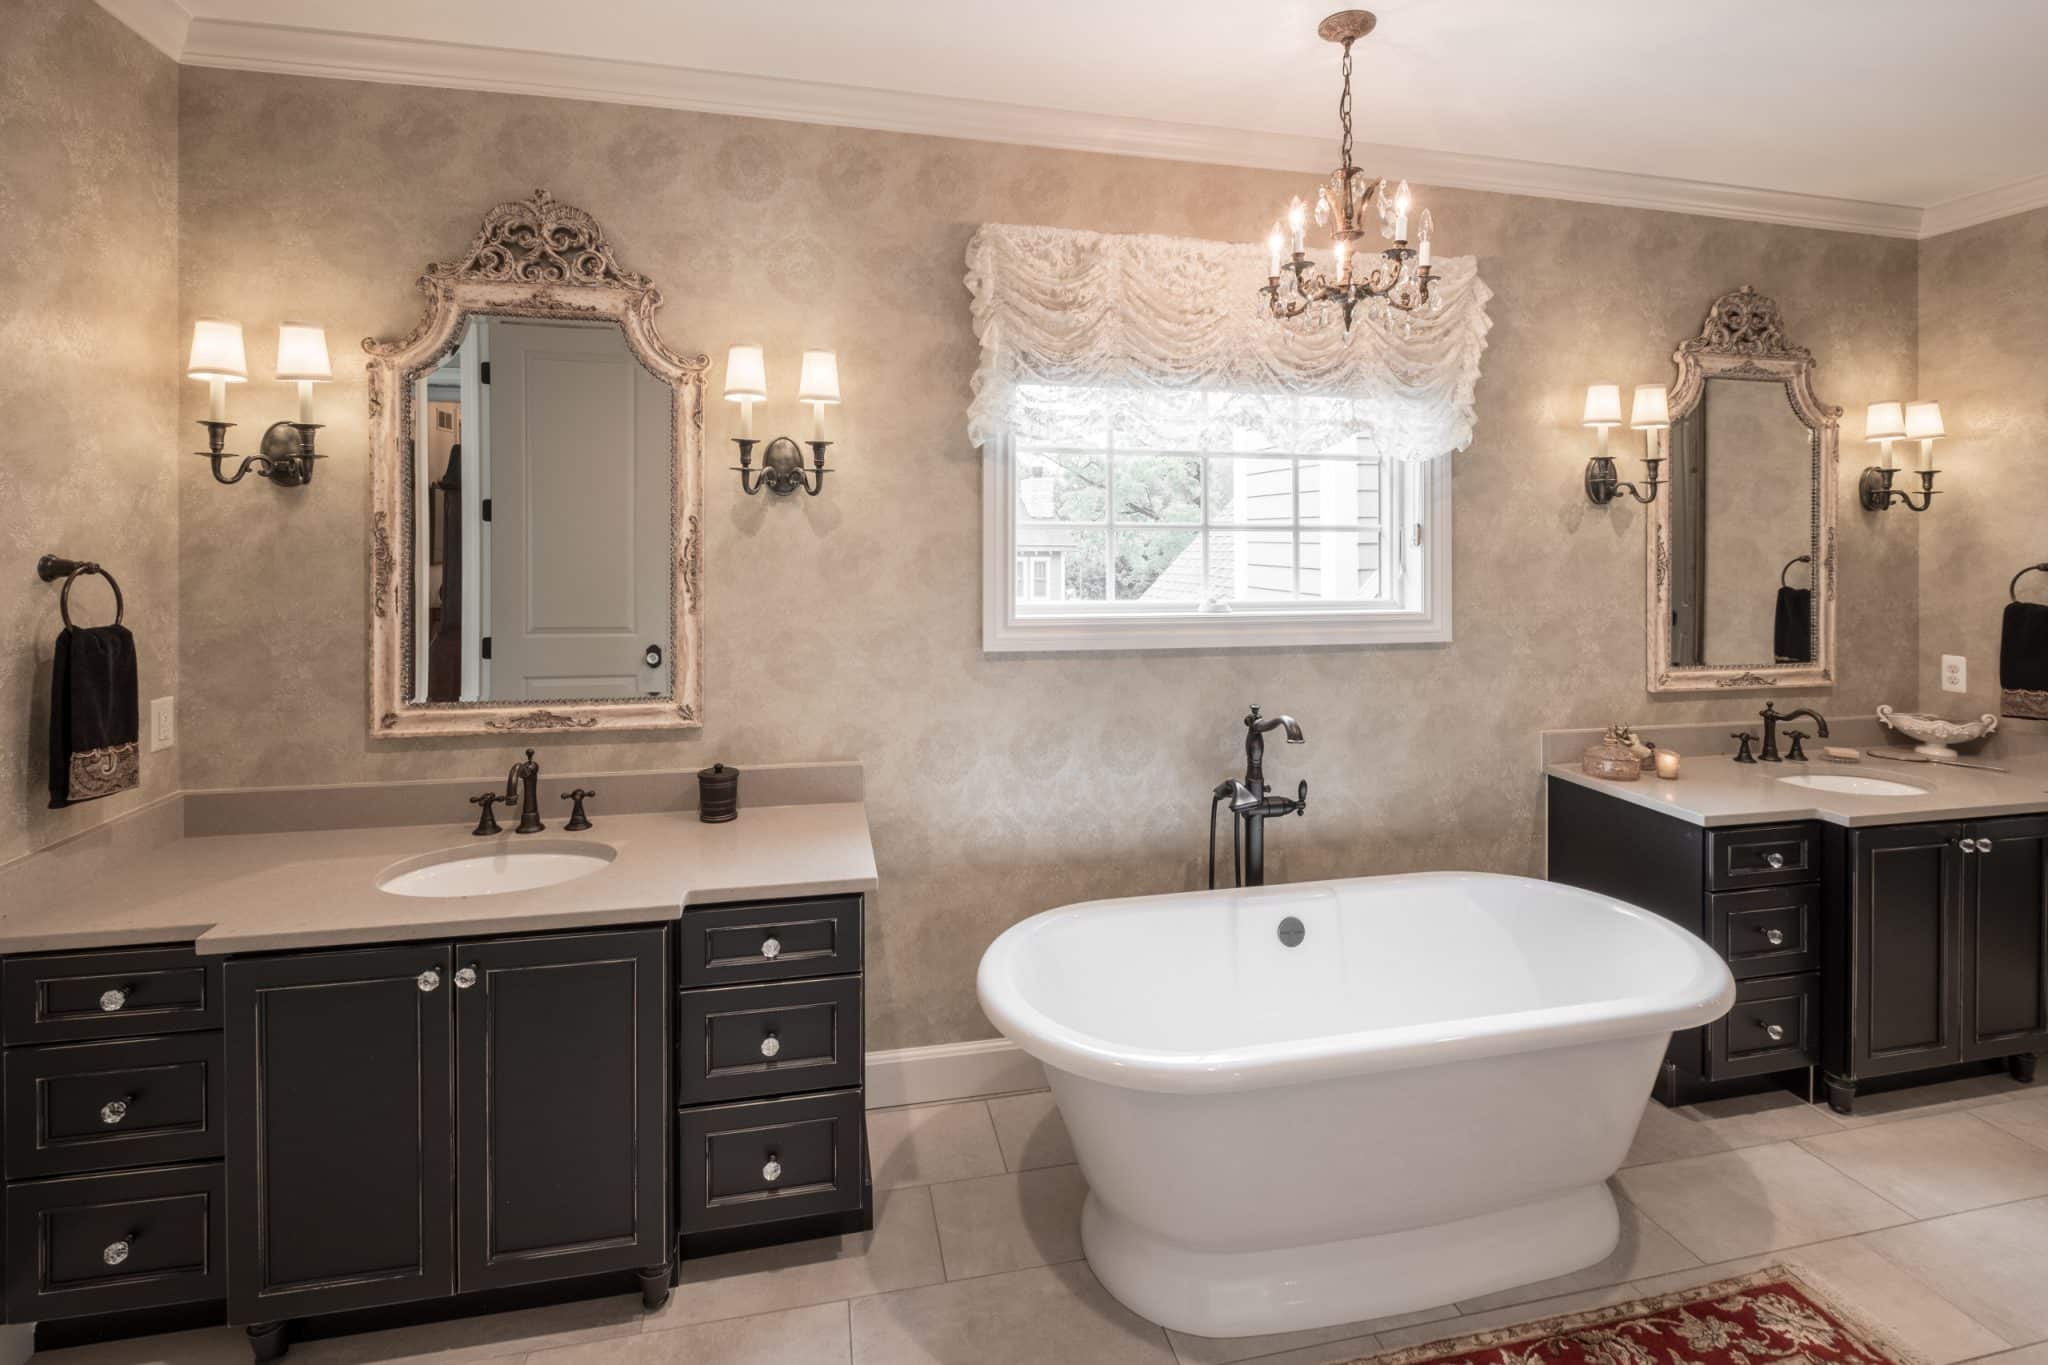 Do French Country Bathrooms Work Well in Smaller Spaces